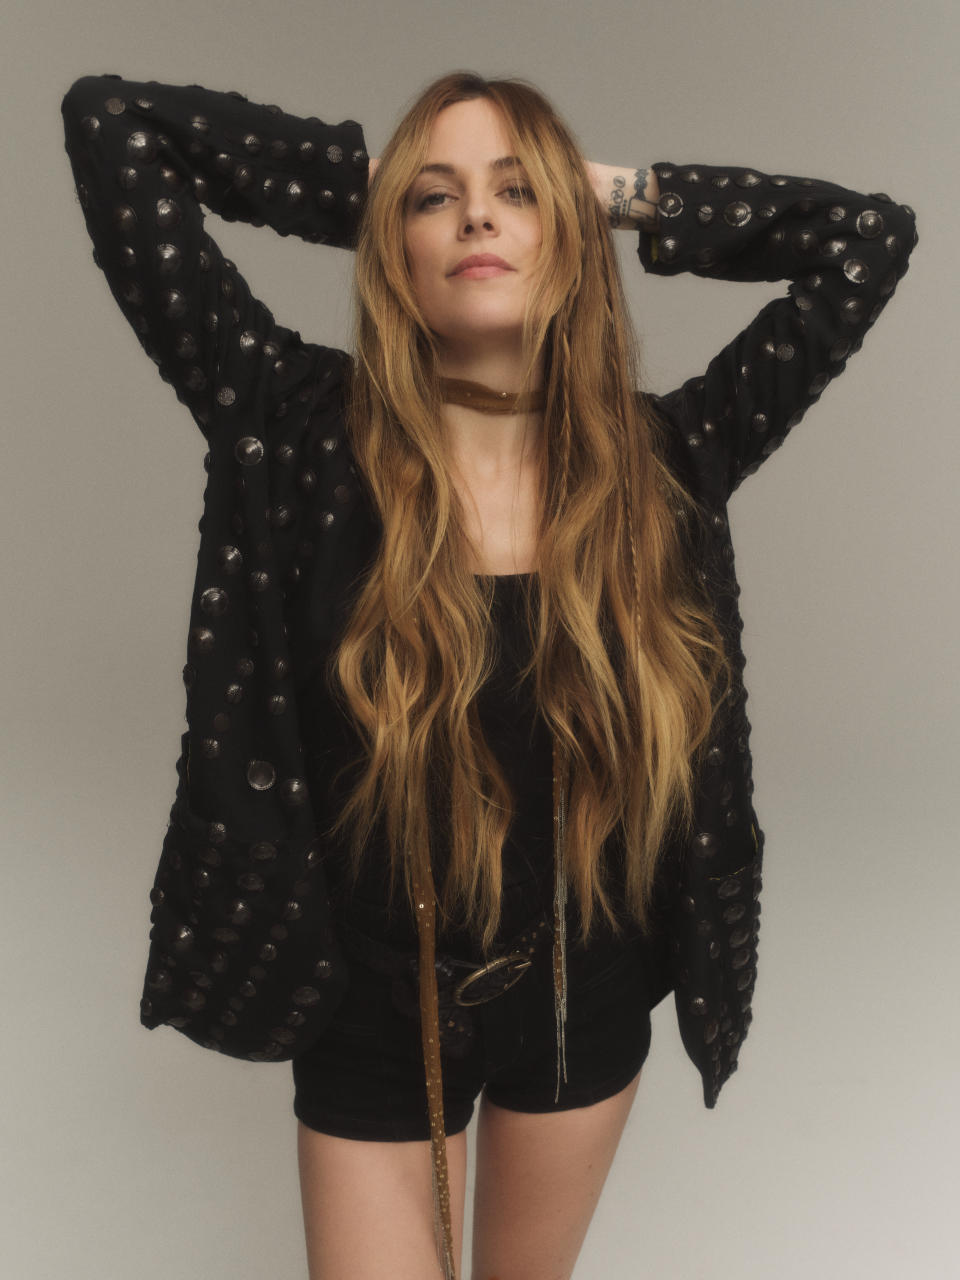 Riley Keough as Daisy Jones for Free People’s “Daisy Jones & the Six” capsule collection.